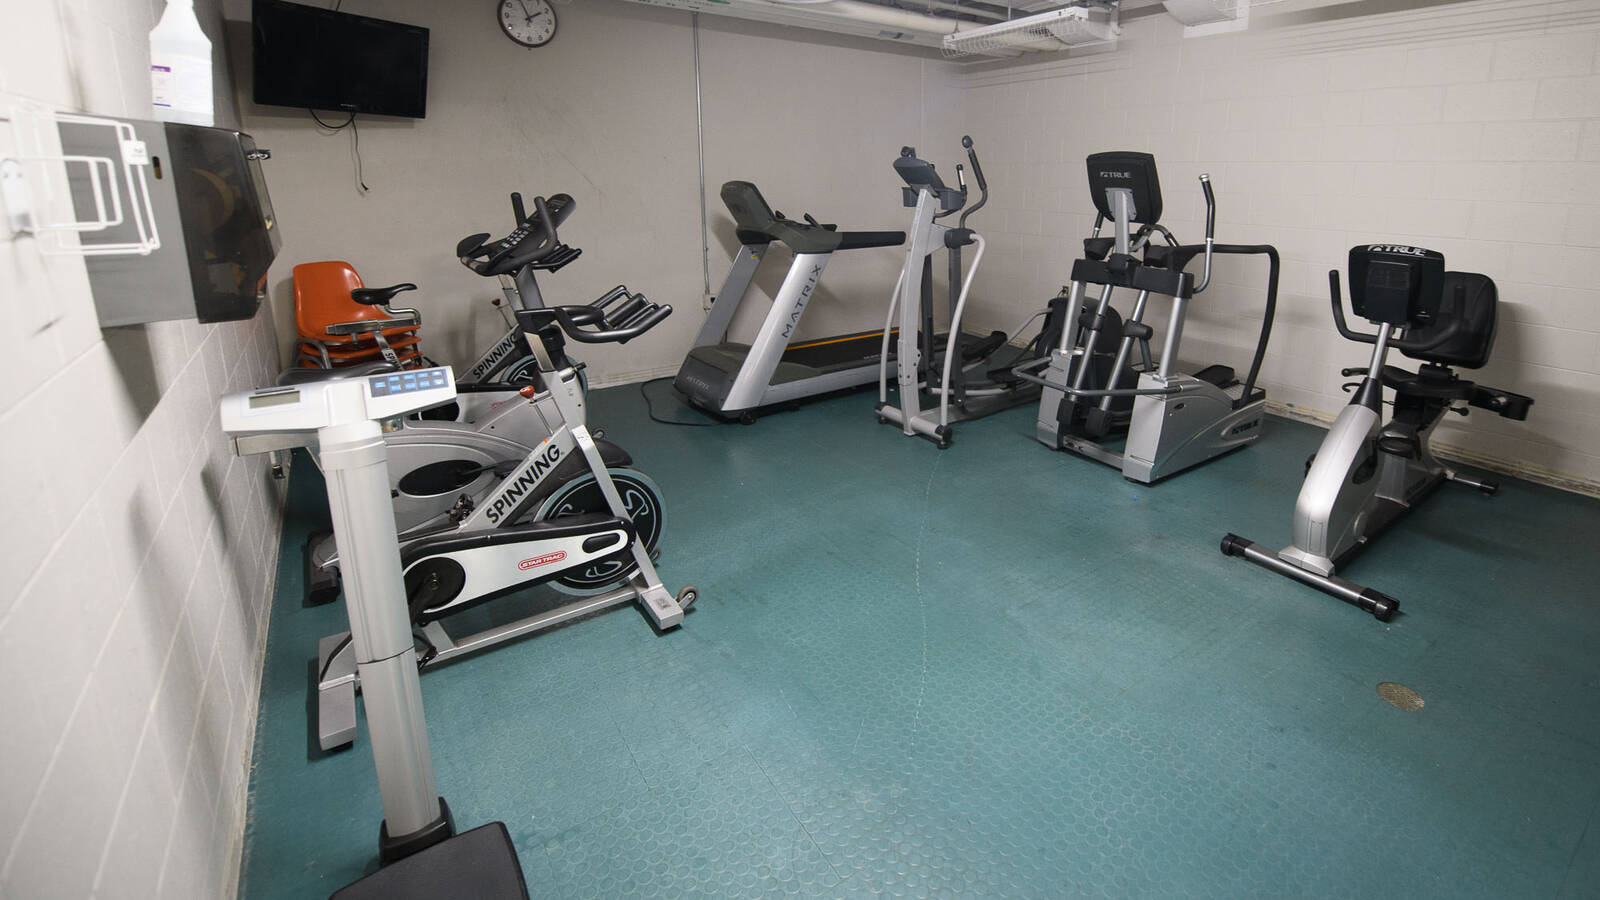 A room with exercise equipment including a treadmill, stationary bikes, and ellipticals.